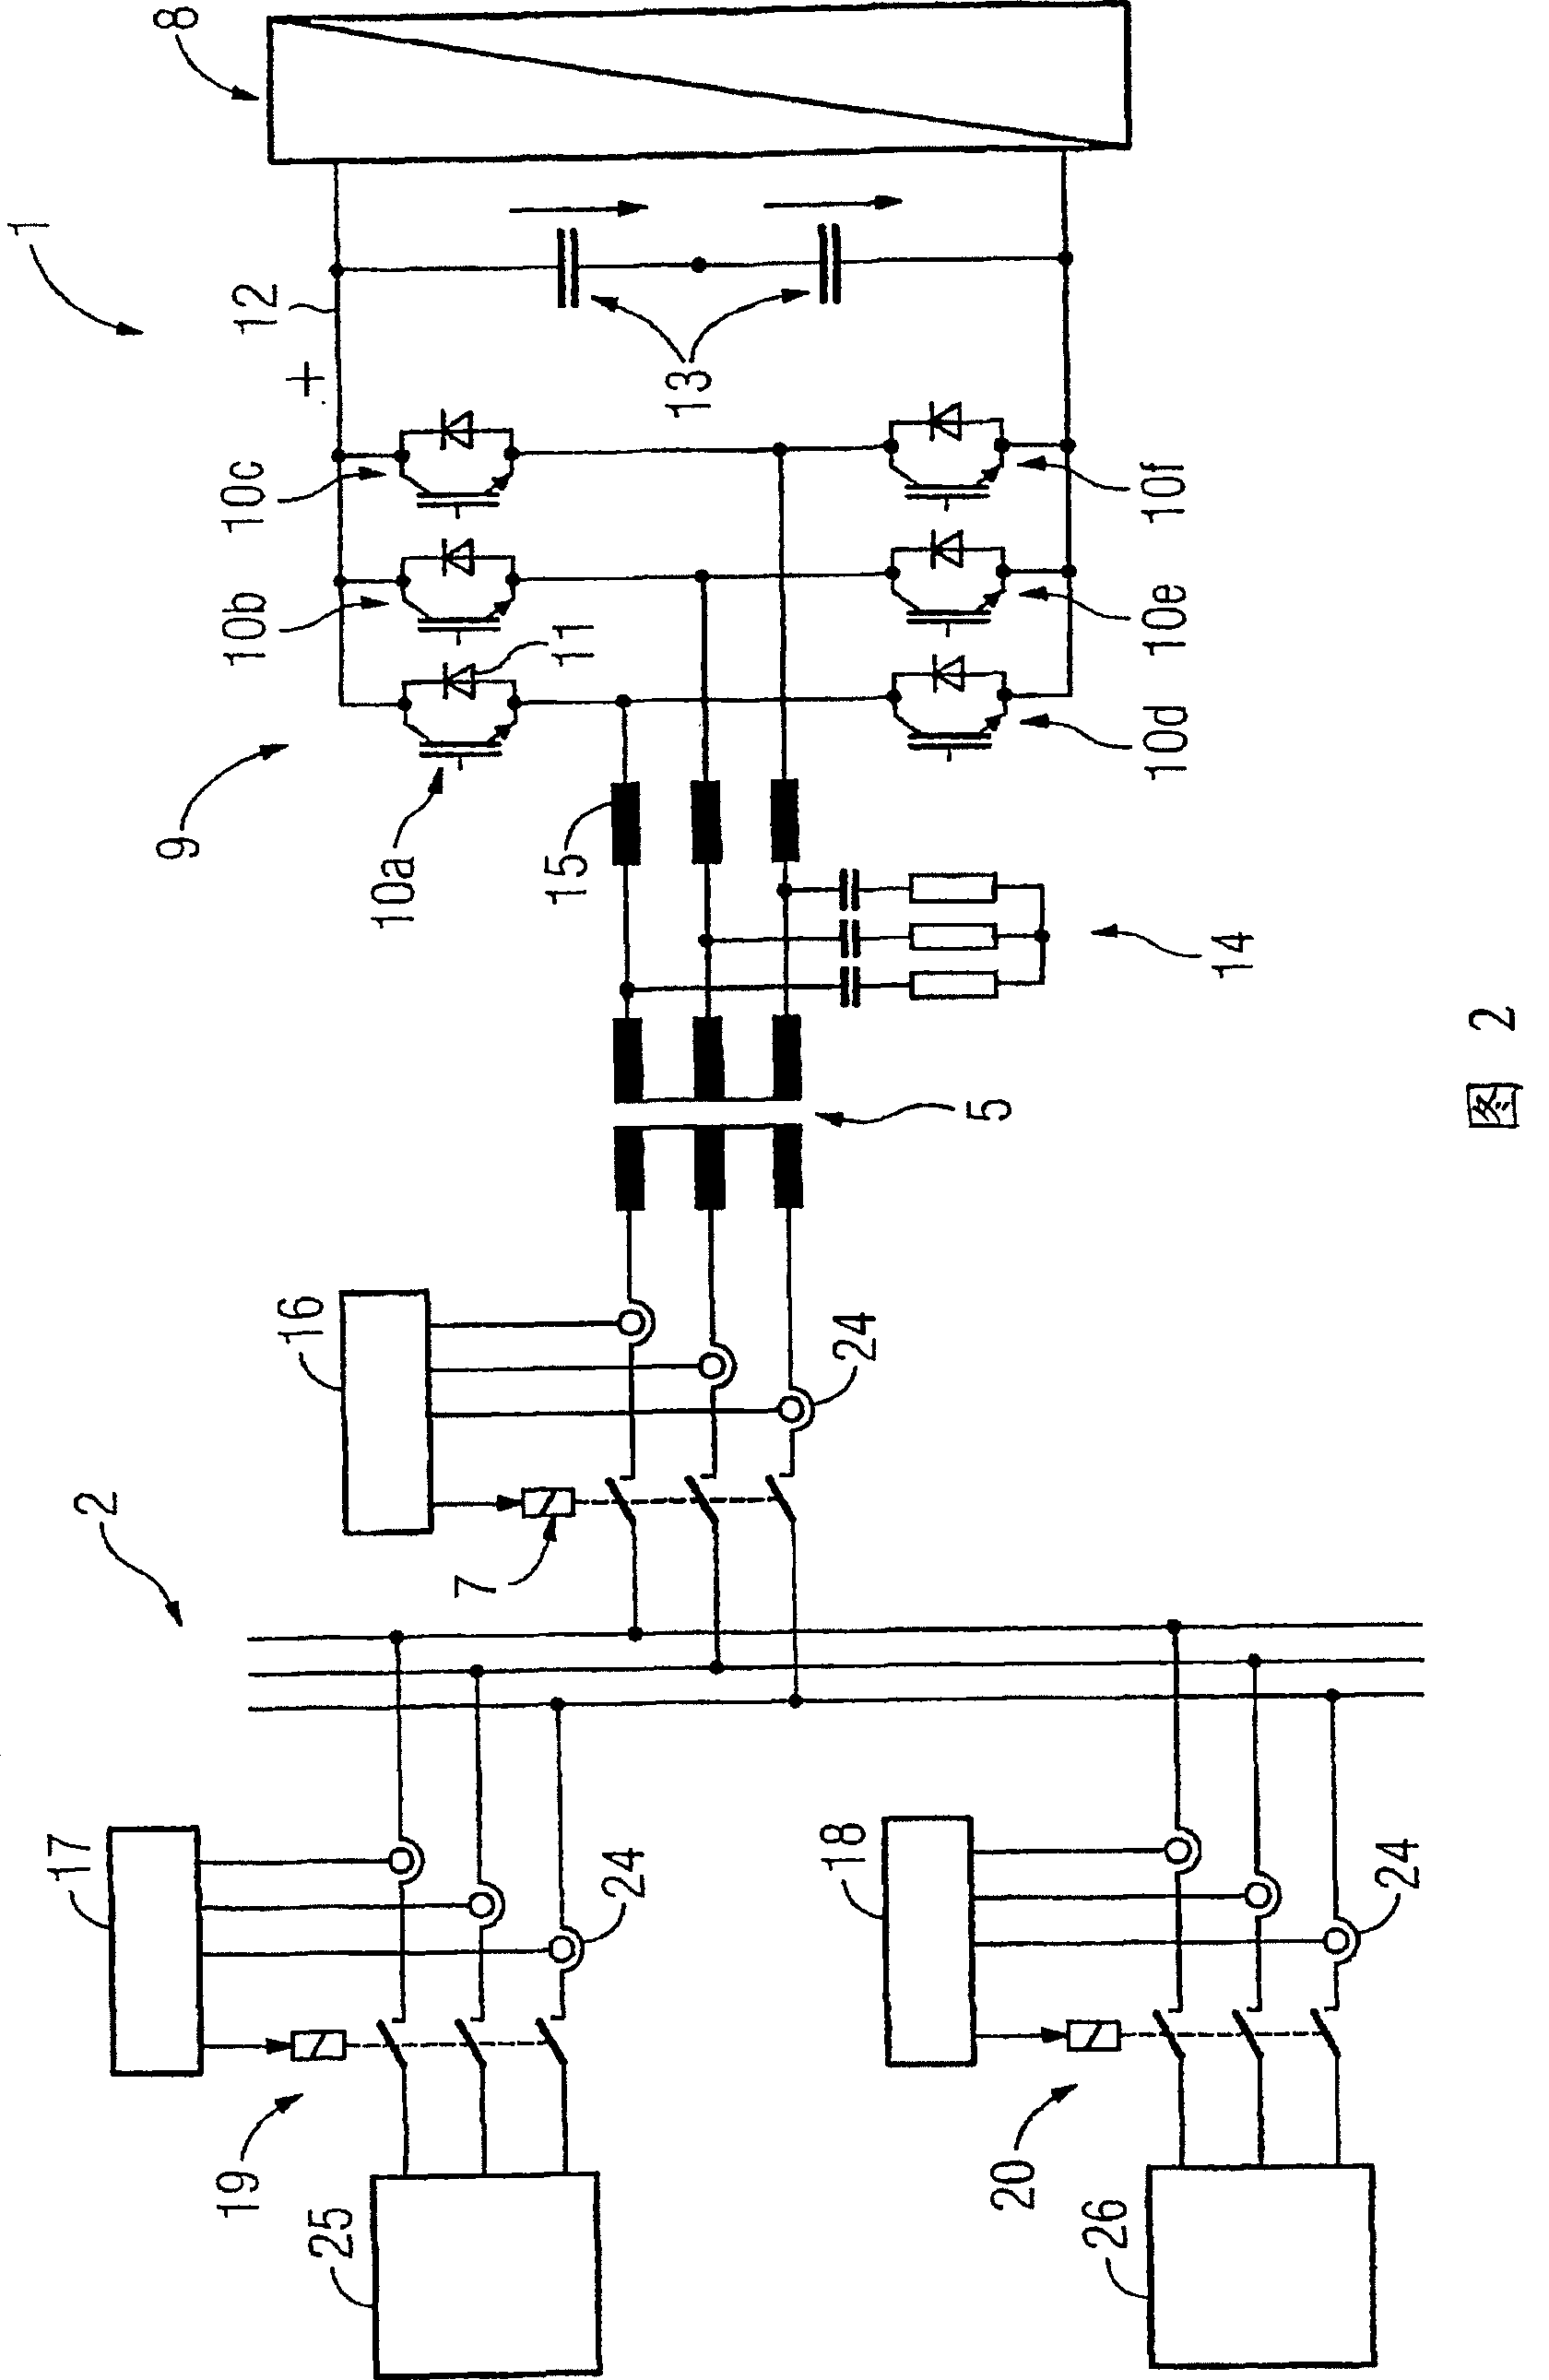 Method for controlling an converter that is connected to a direct-current source